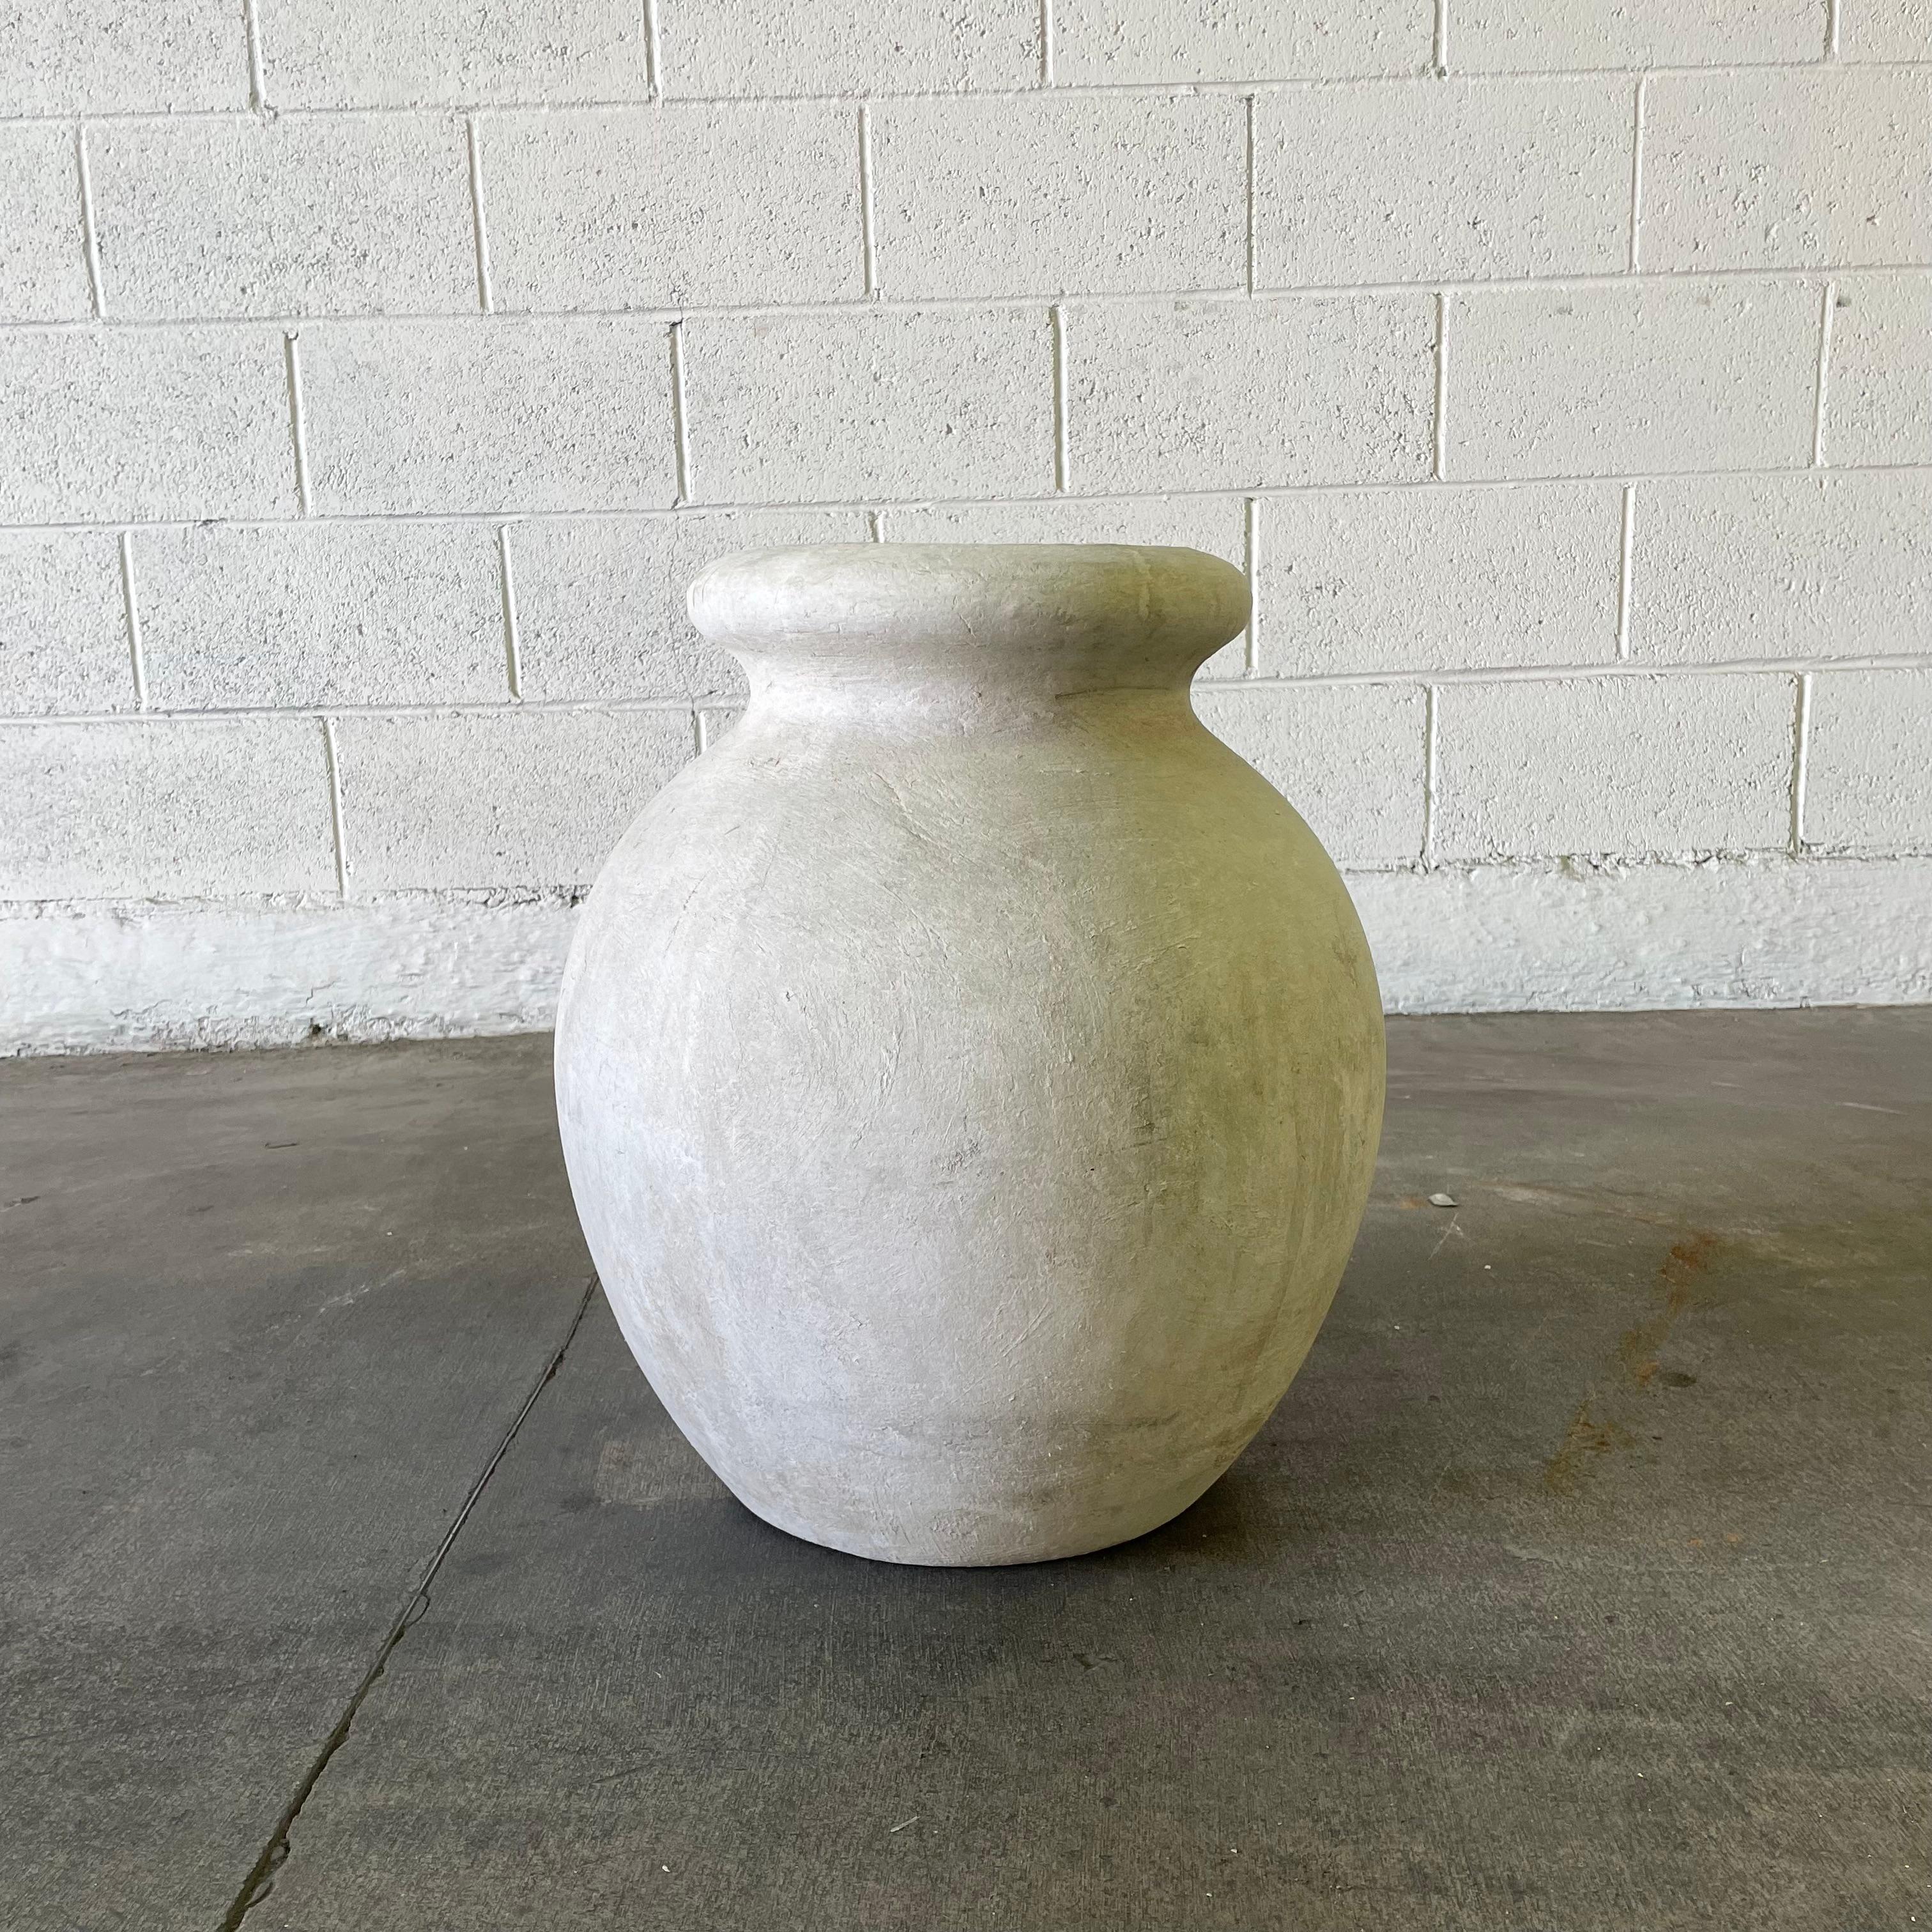 Concrete olive jar planter by Willy Guhl, with great patina and prominent presence. Simple and elegant design perfect for any garden or patio. Excellent vintage condition. 

Mouth opening measures 8.5